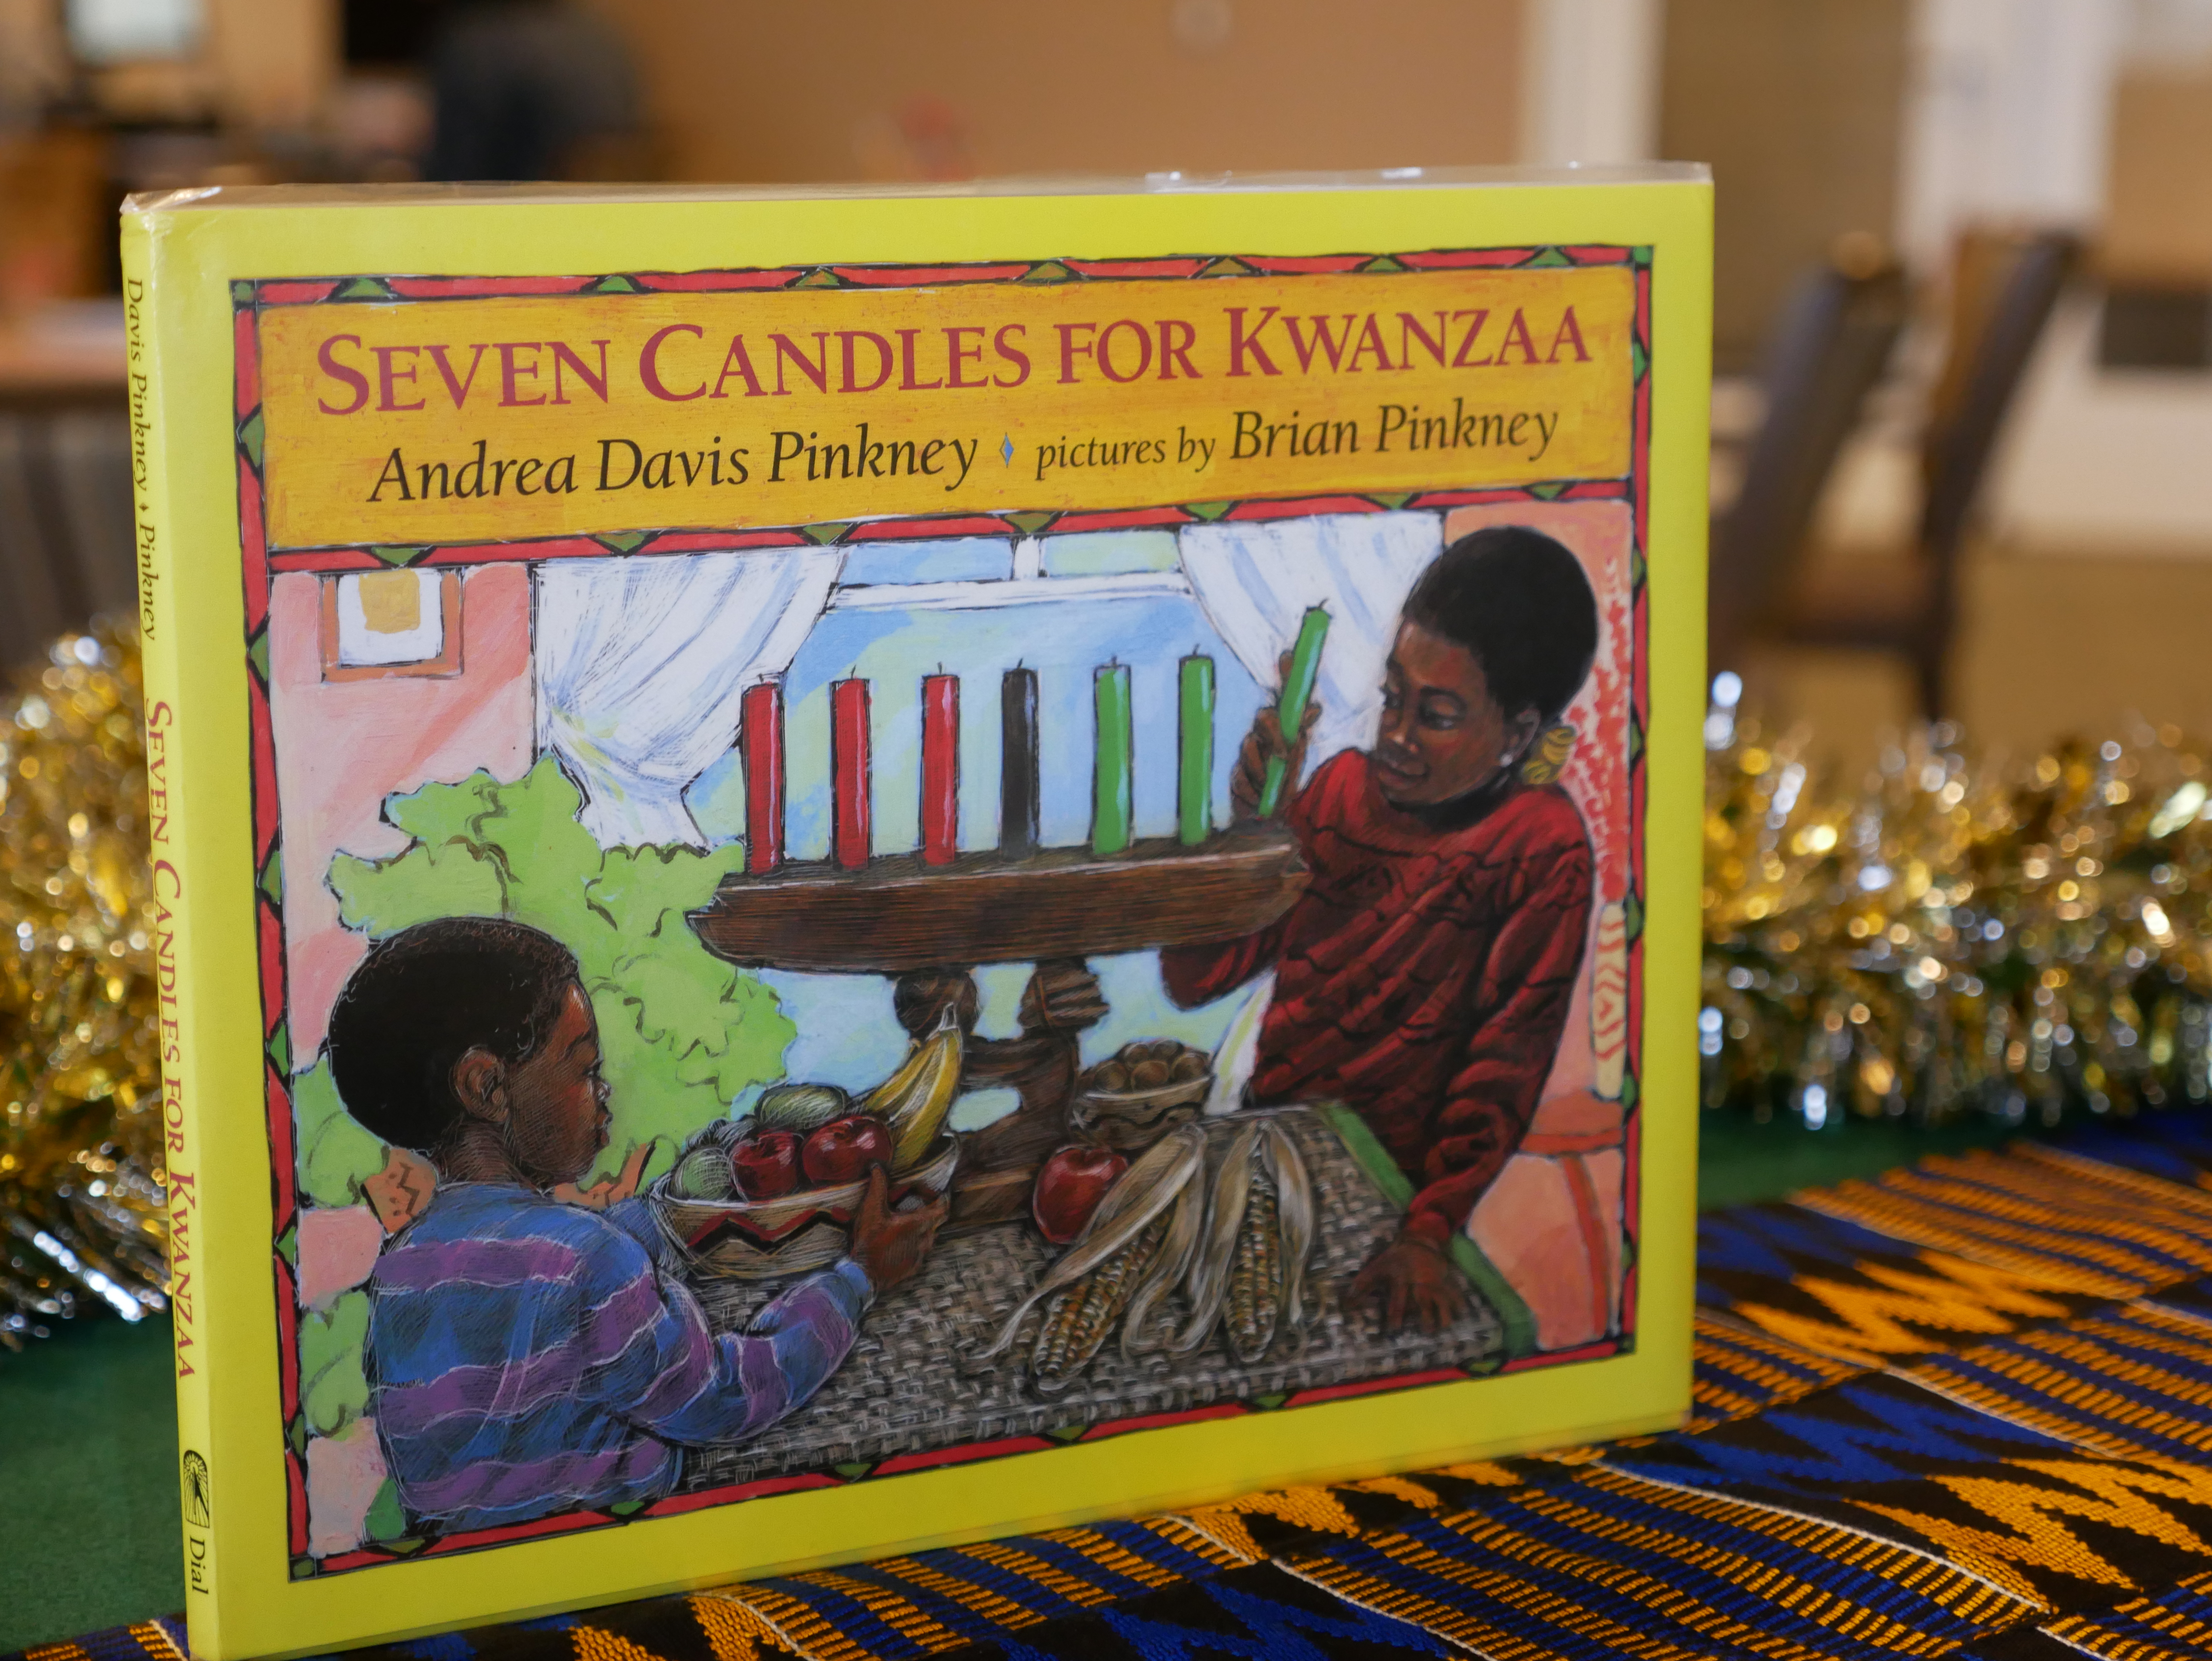 Seven Candles for Kwanzaa by Andrea Davis Pinkney and Illustrated by Brian Pinkney (1993) GT 4403 .P56 1993 Classic book about Kwanzaa and its importance to African American culture